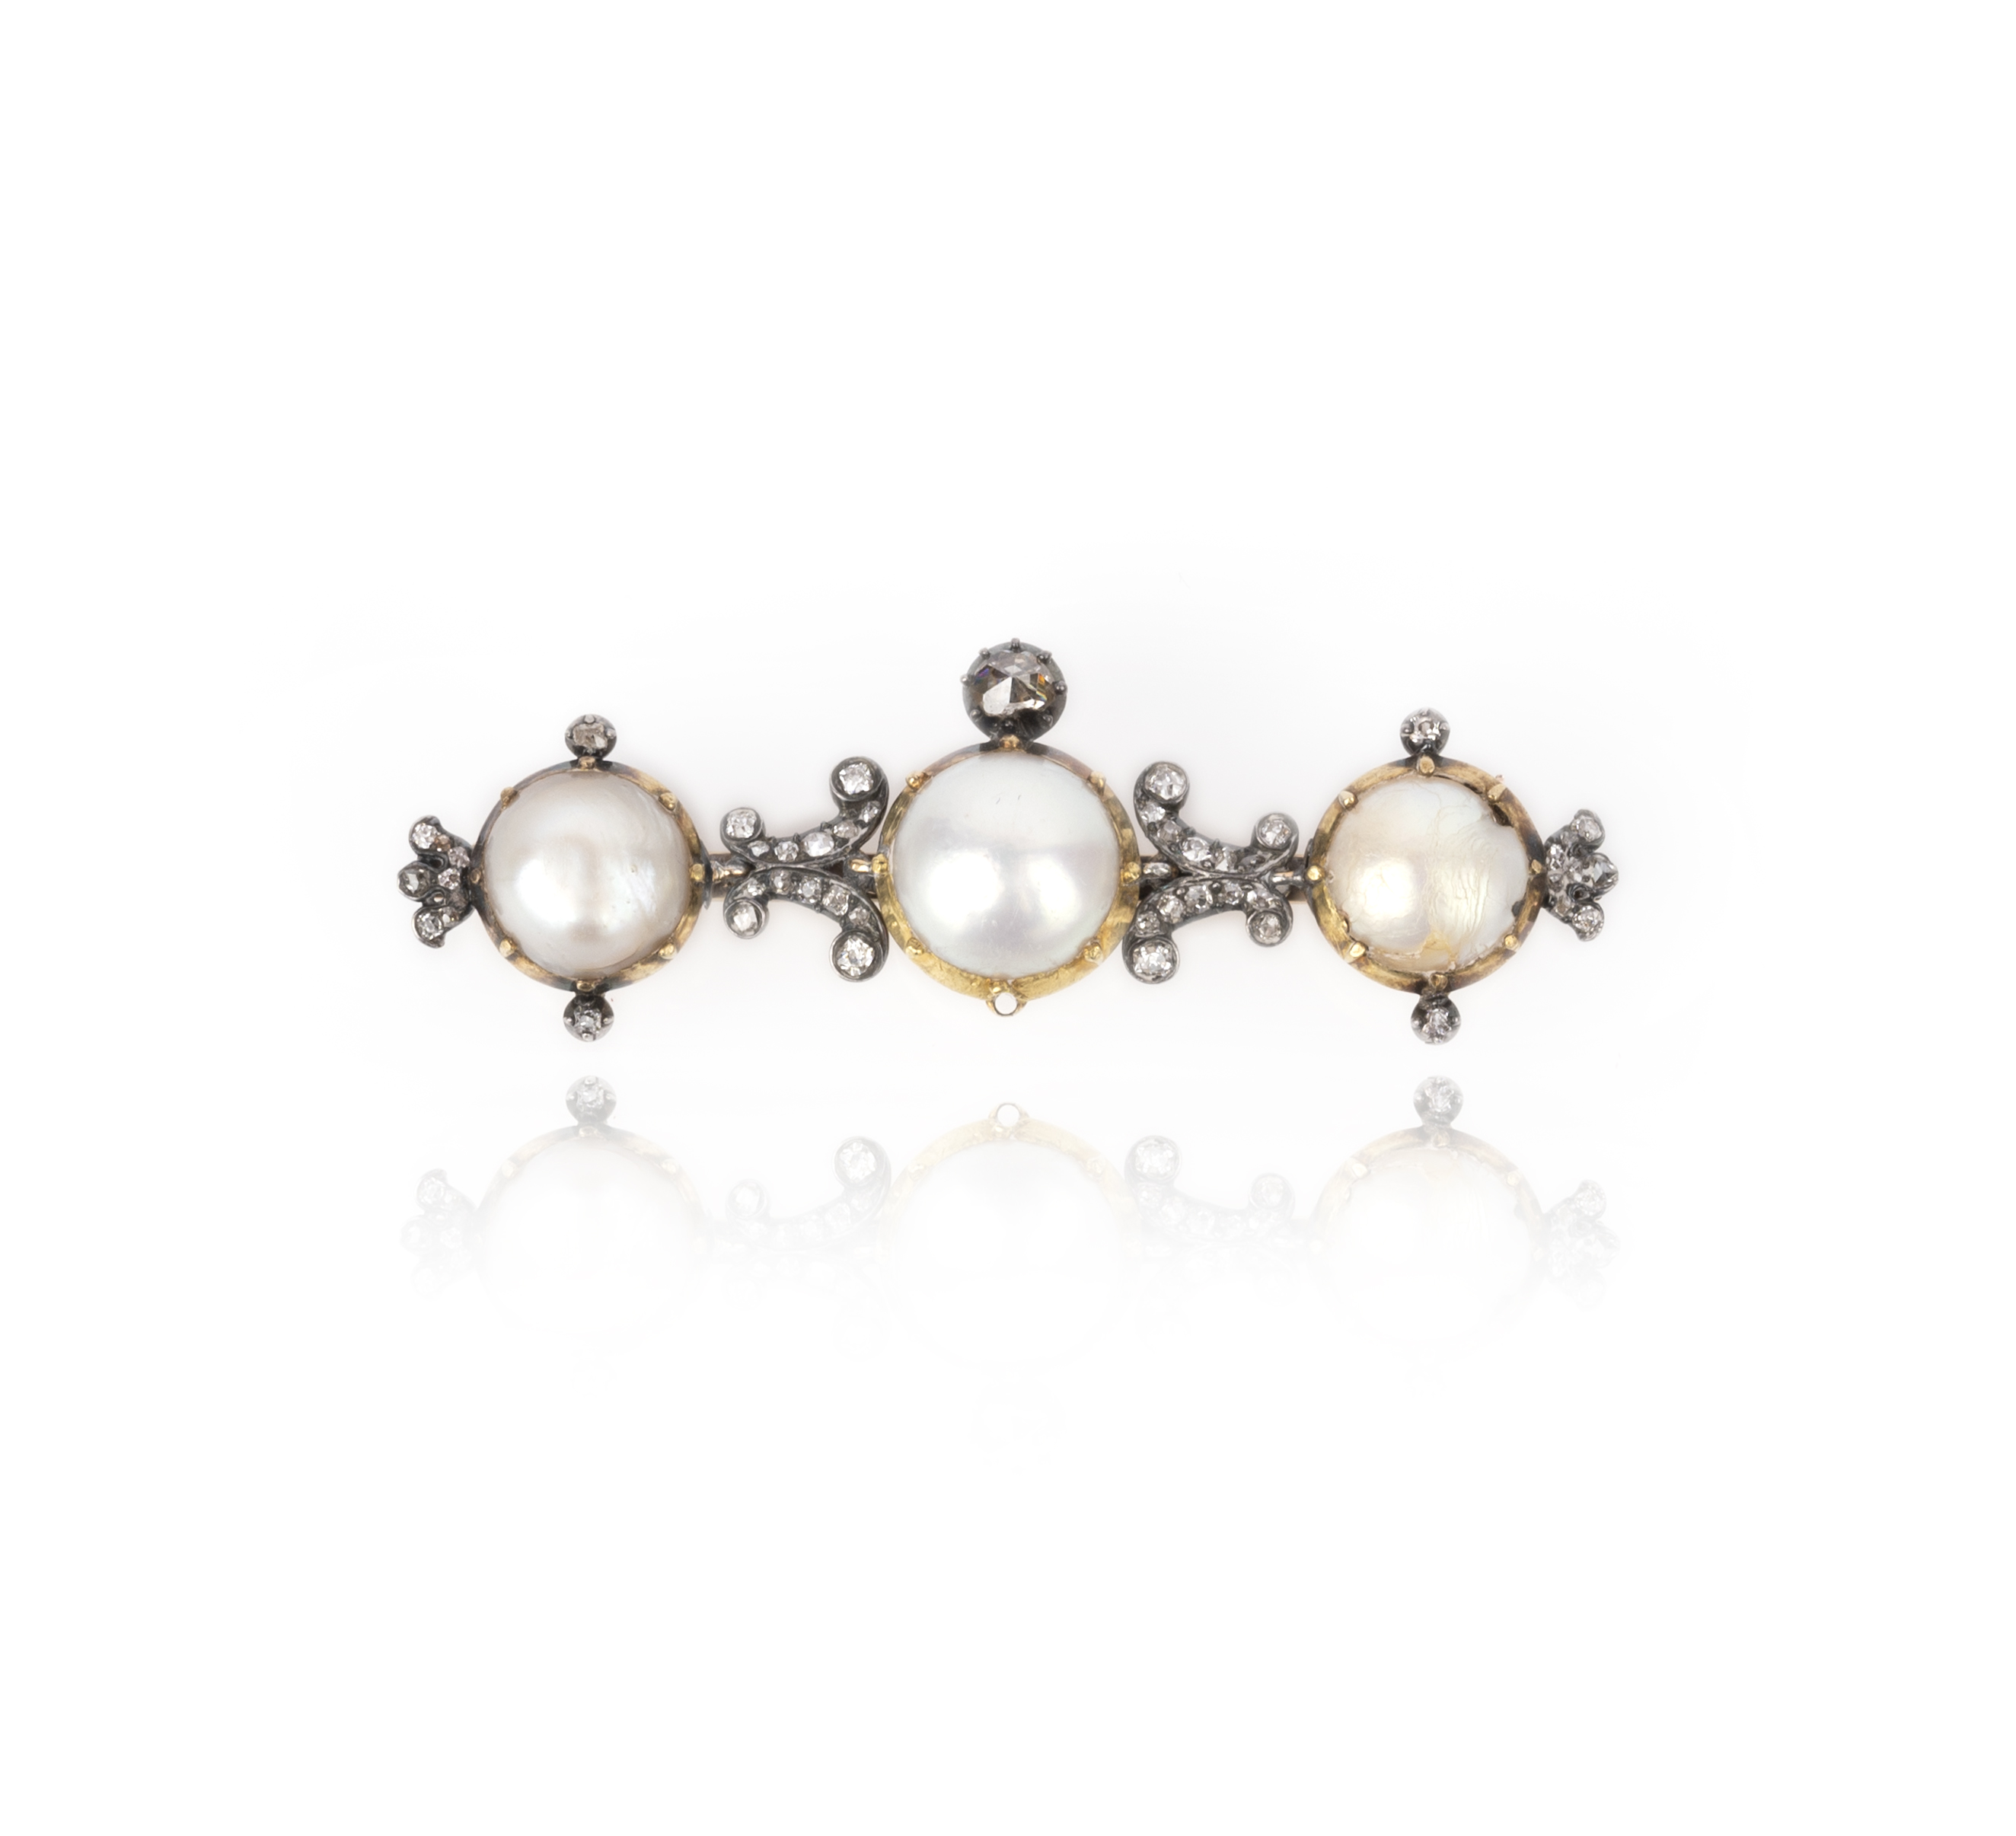 A pearl and diamond brooch, late 19th century, of bar design, set with three half pearls in